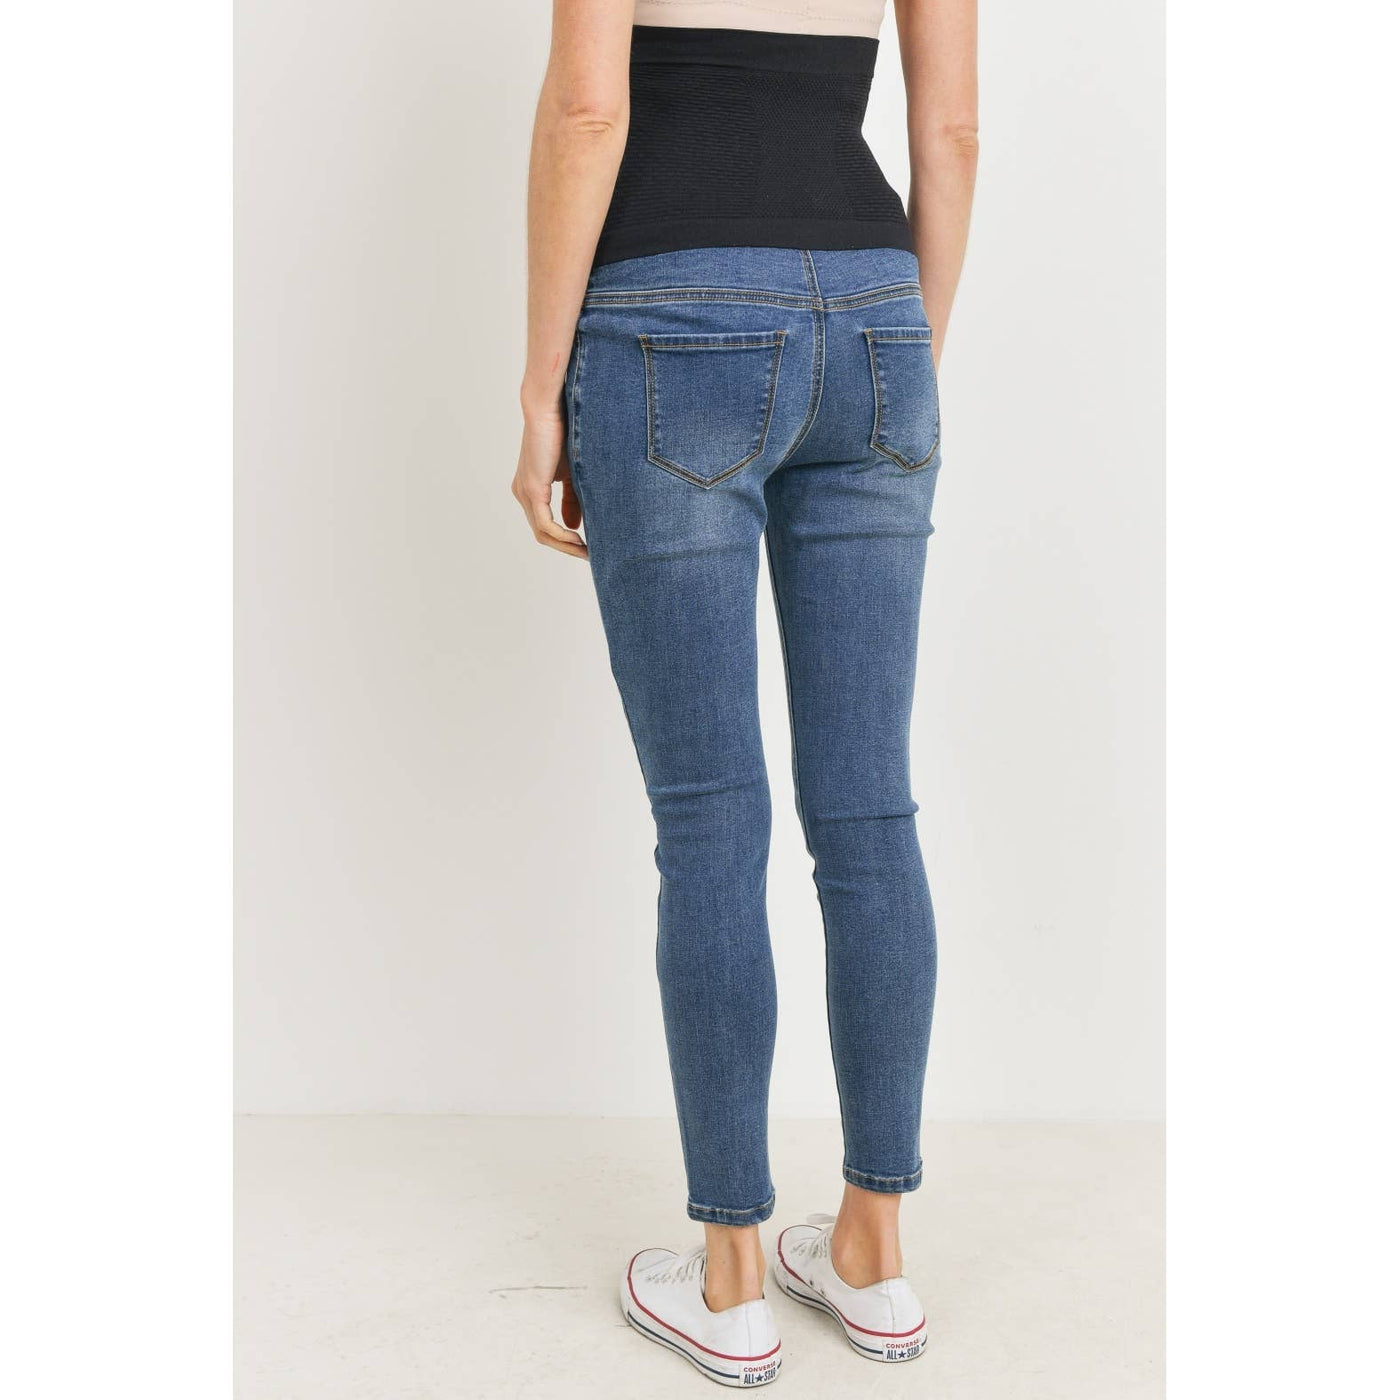 Stretch Maternity Skinny Jeans With Elastic Belly Band